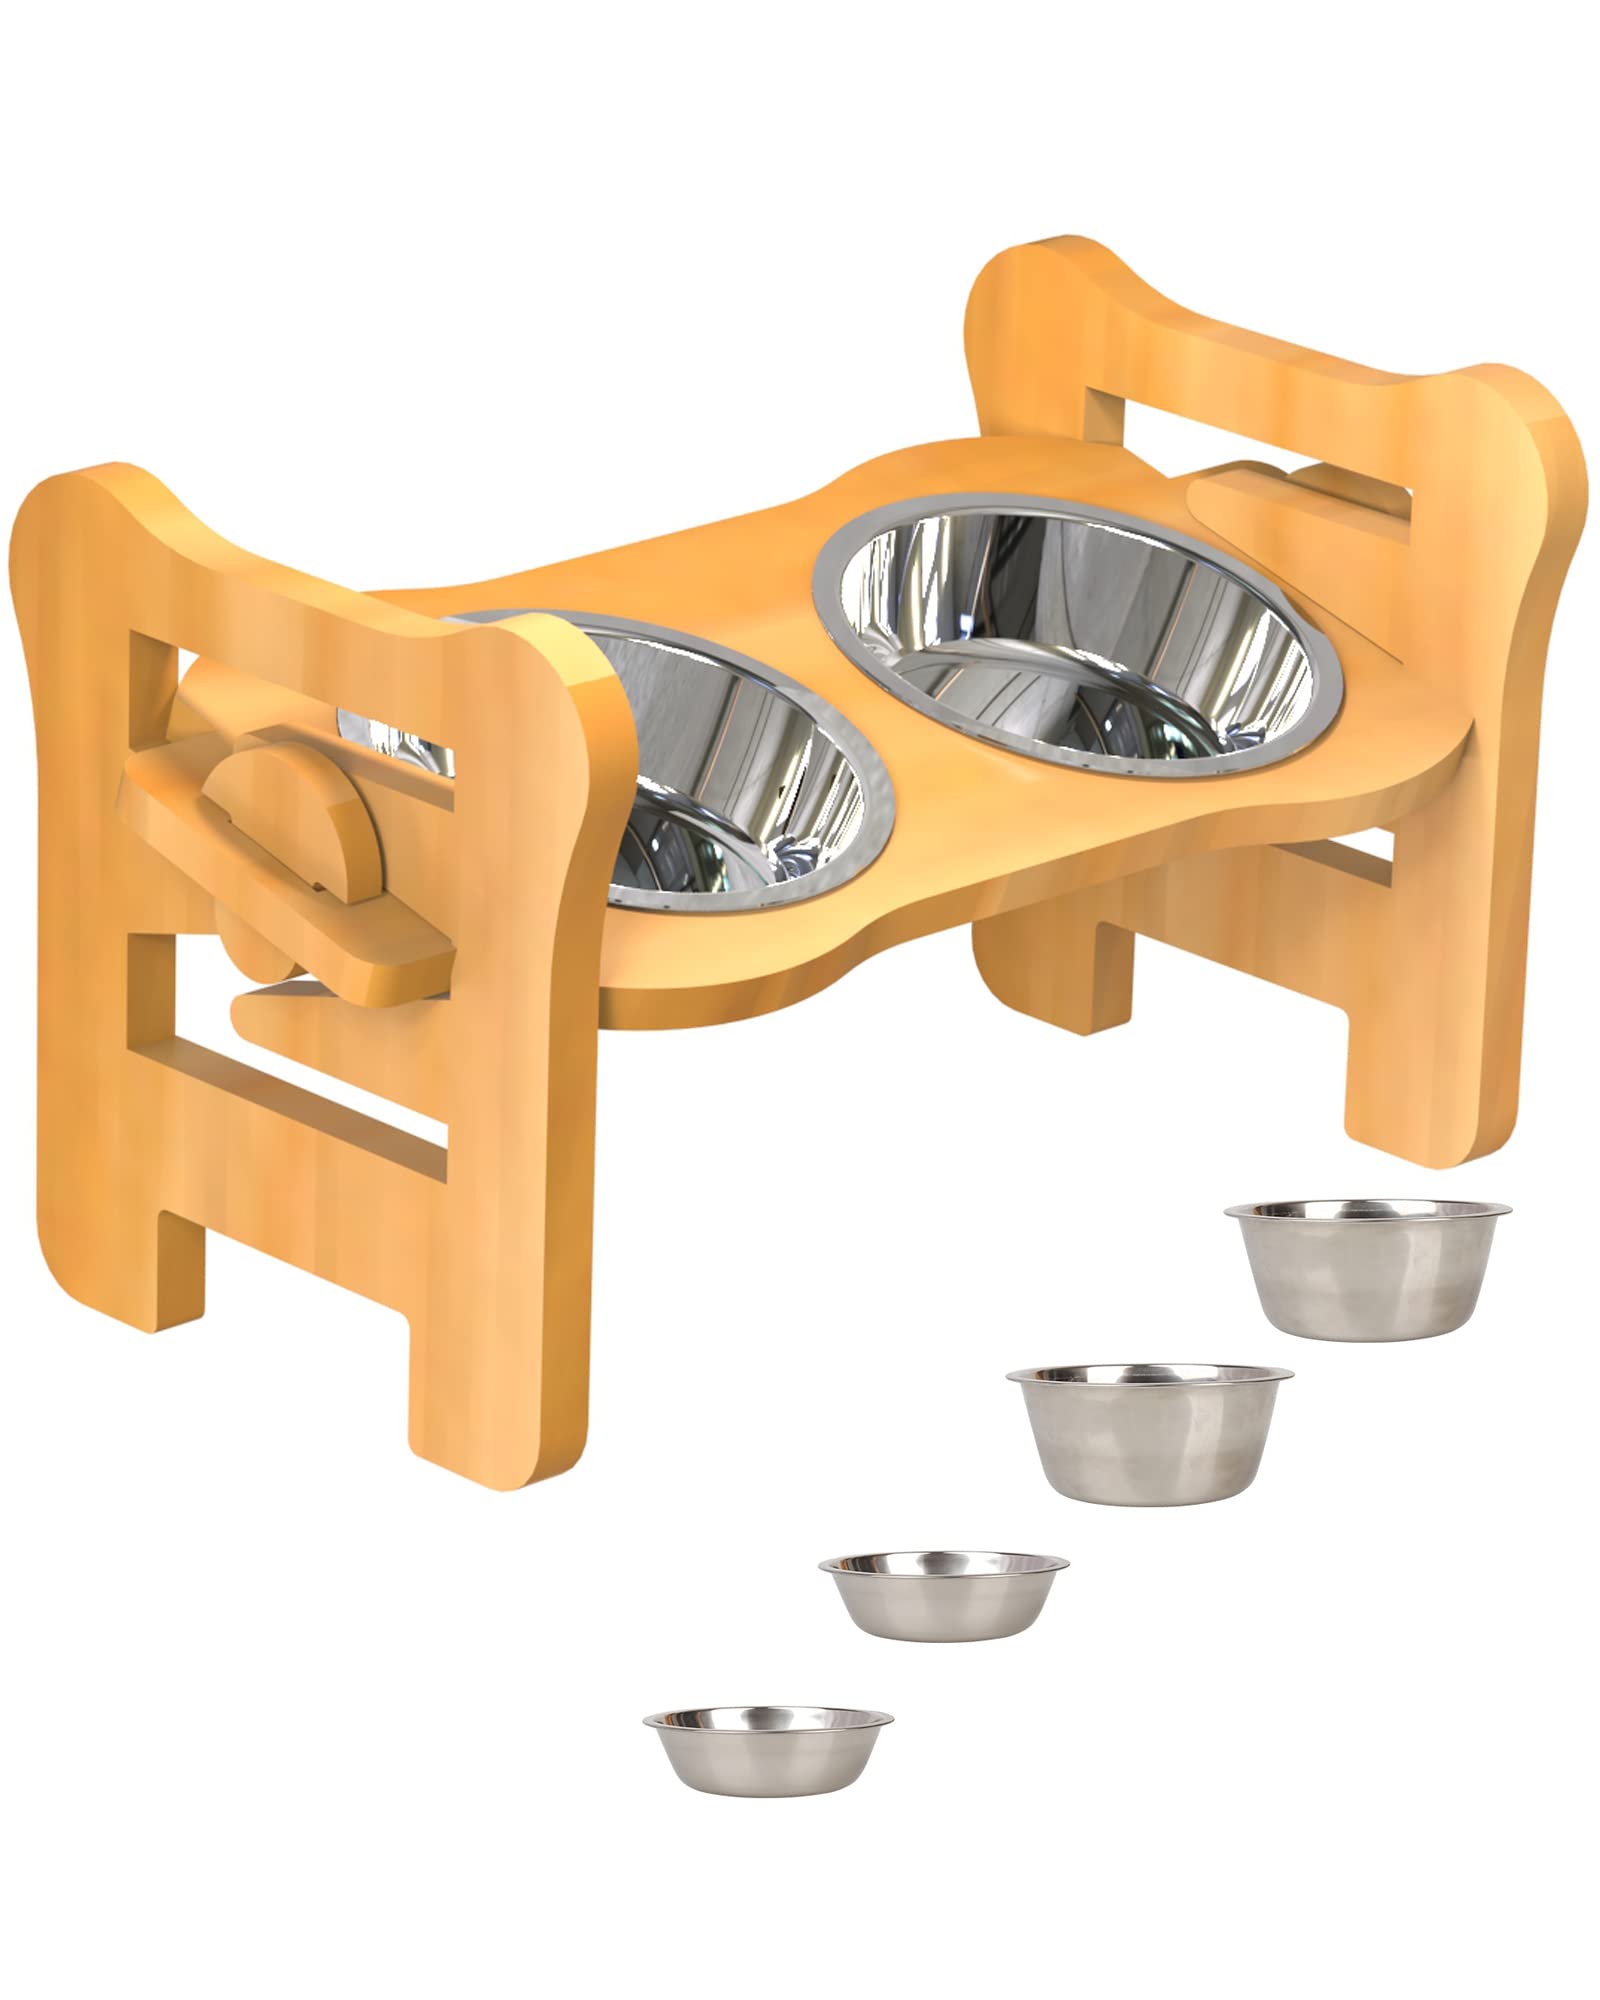 ASEWOTOS Elavated Dog Bowls Bamboo Adjustable Dog Bowl Stand for Medium Dogs  and Samll DogscatsPet Food Bowl Stand with